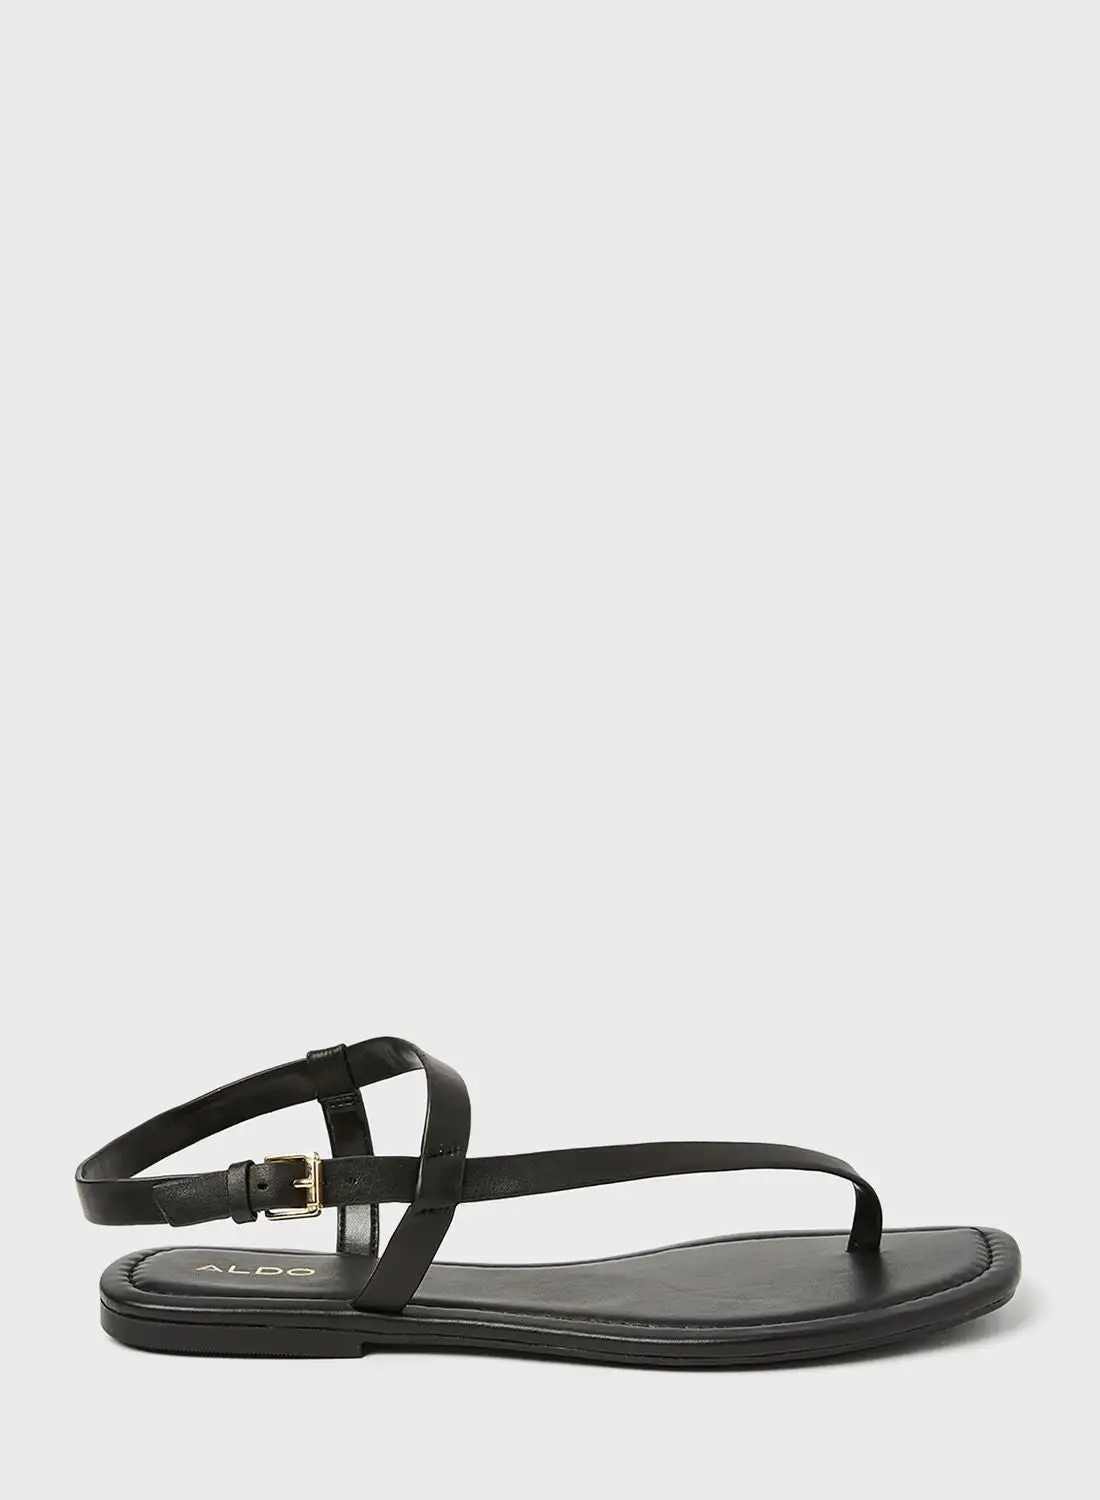 ALDO Holthuis Leather Sandals